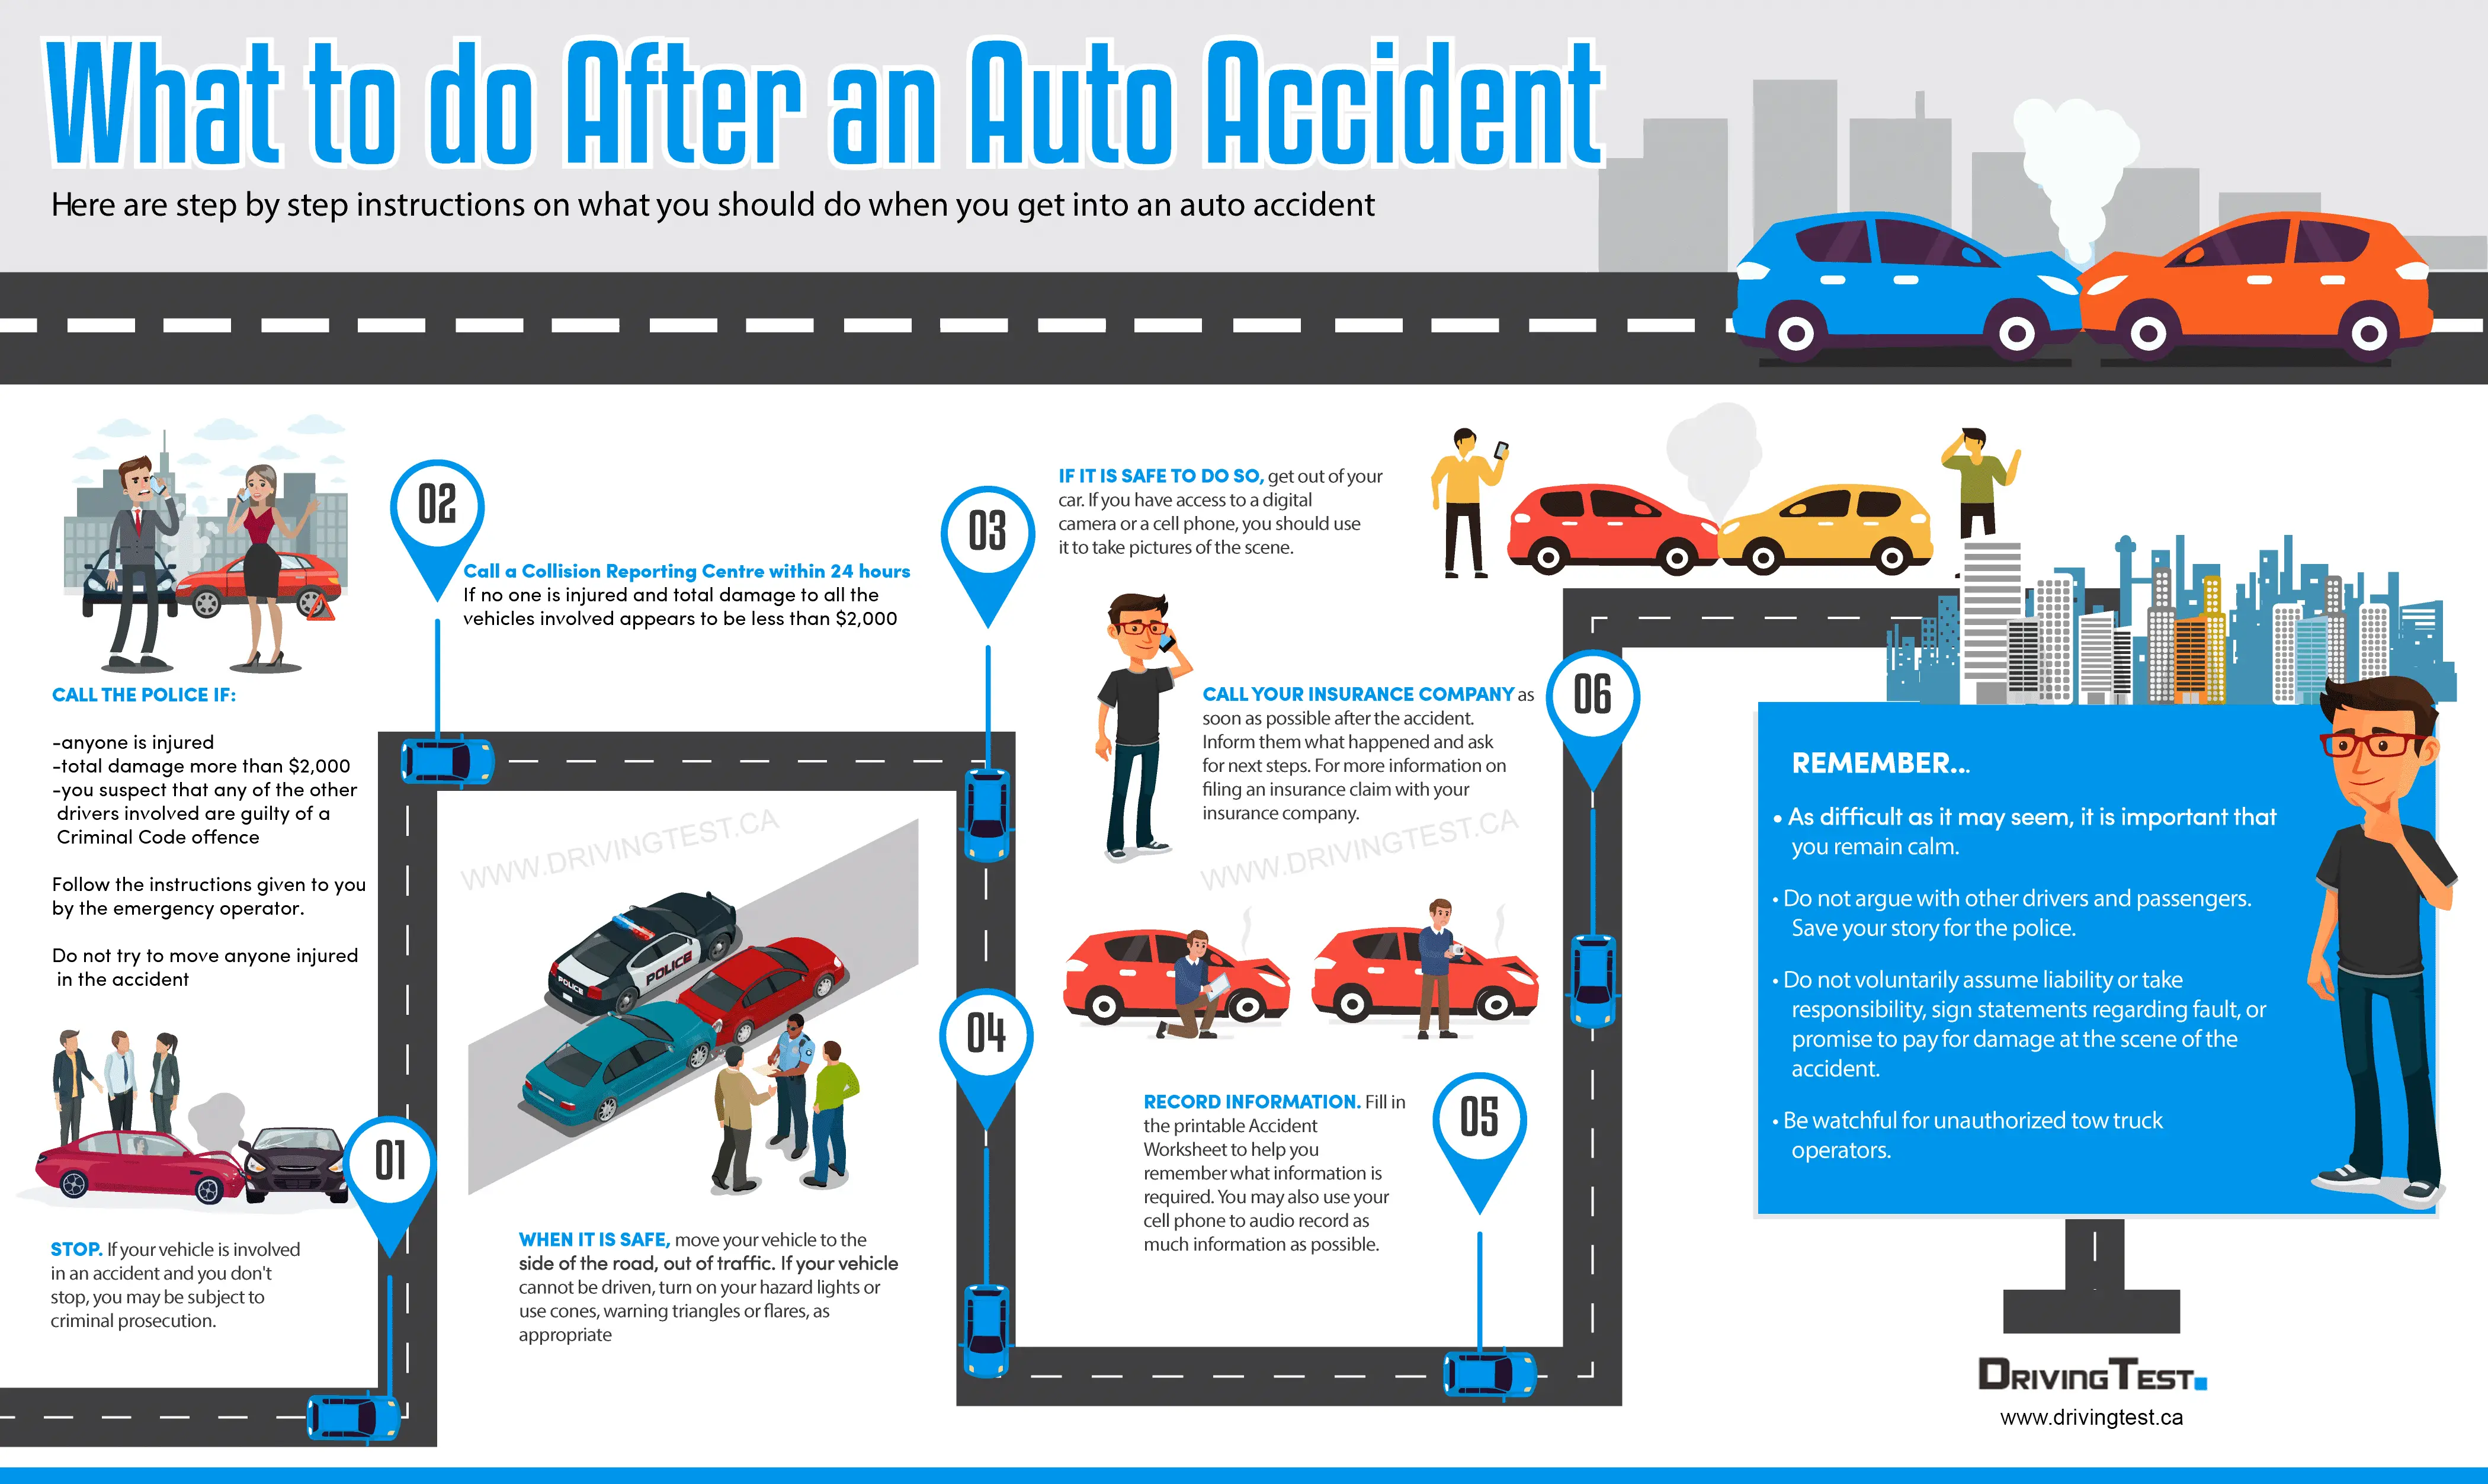 WHAT TO DO AFTER AN AUTO ACCIDENT